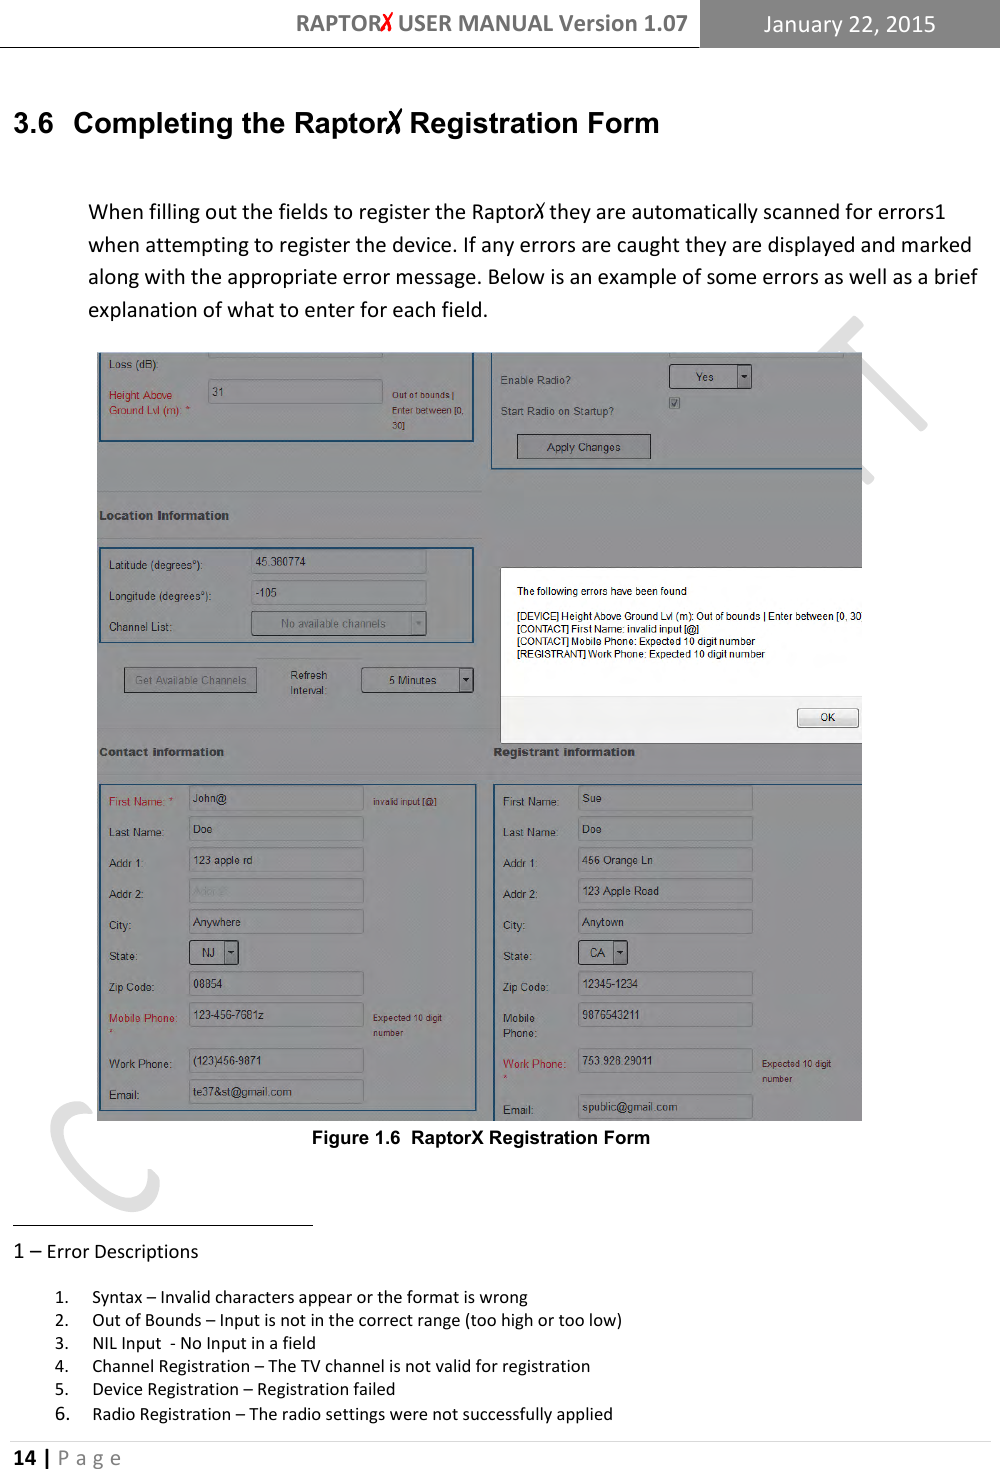 RAPTORX USER MANUAL Version 1.07 January 22, 2015  14 | P a g e   3.6  Completing the RaptorX Registration Form  When filling out the fields to register the RaptorX they are automatically scanned for errors1 when attempting to register the device. If any errors are caught they are displayed and marked along with the appropriate error message. Below is an example of some errors as well as a brief explanation of what to enter for each field.                                                                                       1 – Error Descriptions 1. Syntax – Invalid characters appear or the format is wrong 2. Out of Bounds – Input is not in the correct range (too high or too low) 3. NIL Input  - No Input in a field 4. Channel Registration – The TV channel is not valid for registration 5. Device Registration – Registration failed  6. Radio Registration – The radio settings were not successfully applied Figure 1.6  RaptorX Registration Form 